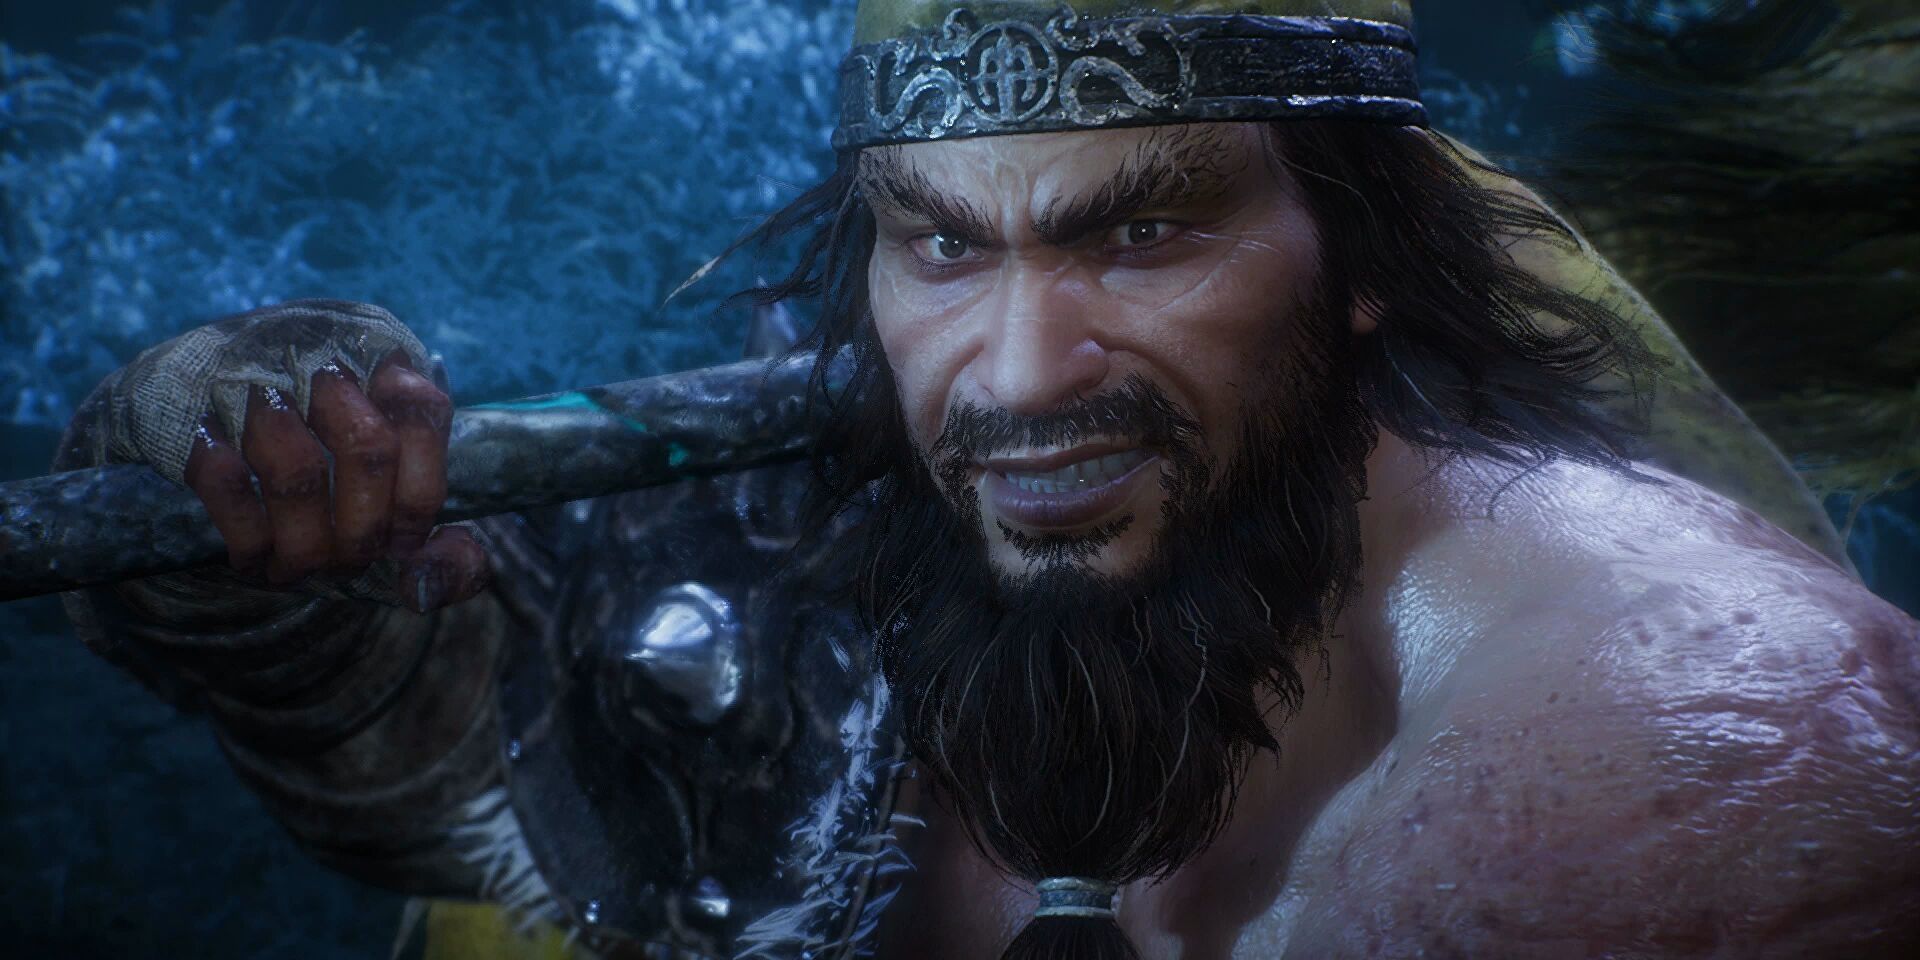 Wo Long: Fallen Dynasty's Zhang Liang boss smirks while supporting his large club-like weapon on his shoulder. He has a large beard, long hair, and wears a metal headband with dragons on it.